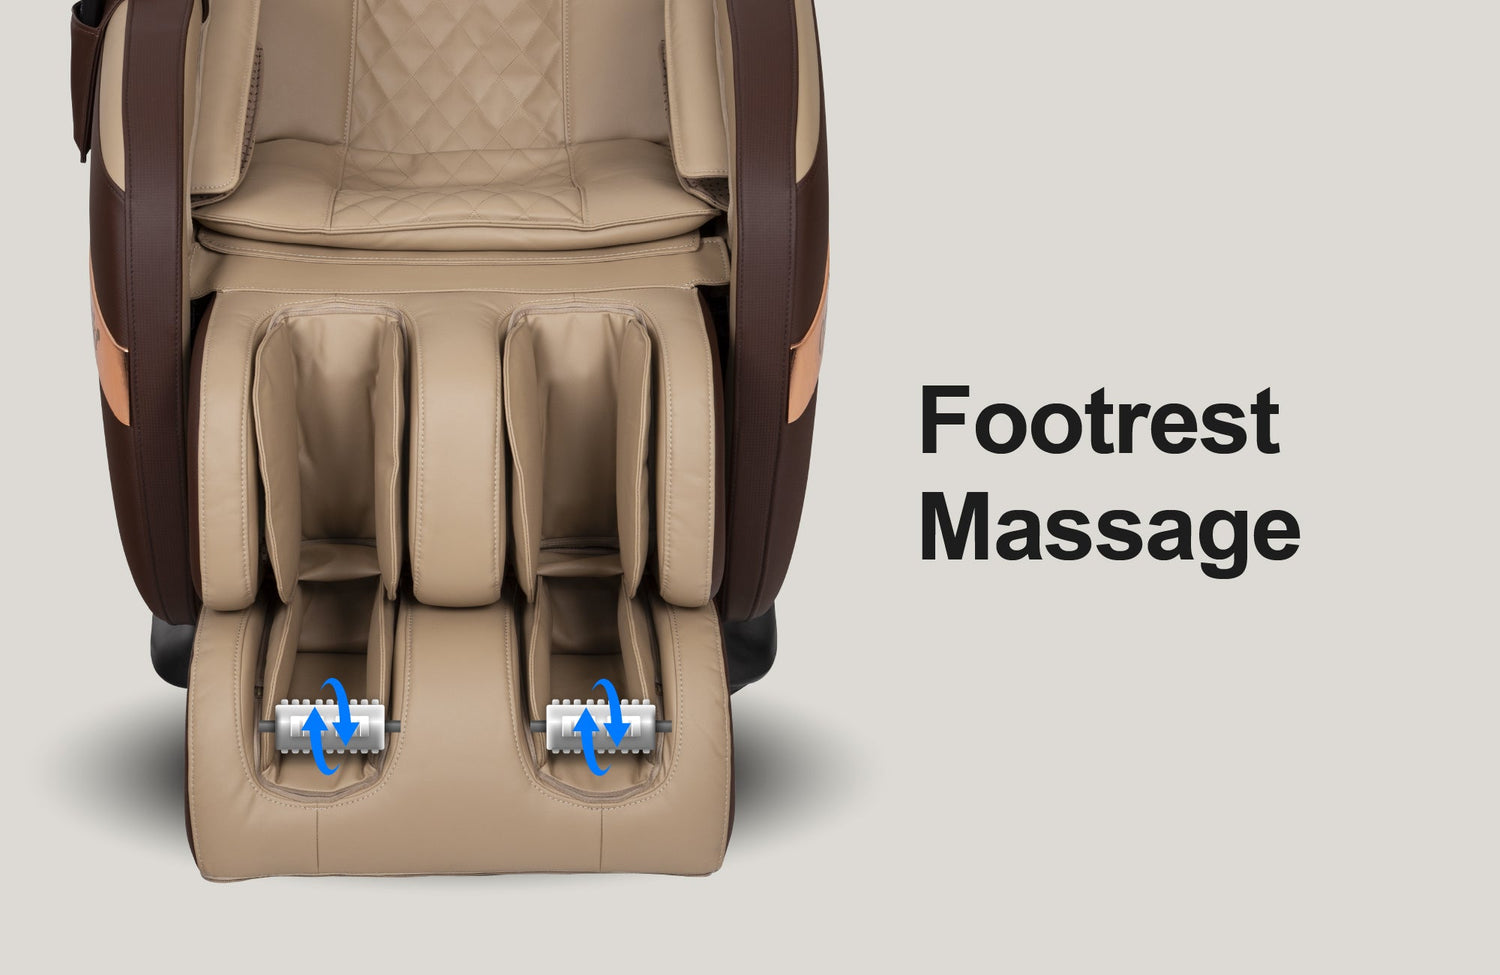 OS- Champ has 2 spinning reflexology massage rollers located on the bottom of the feet